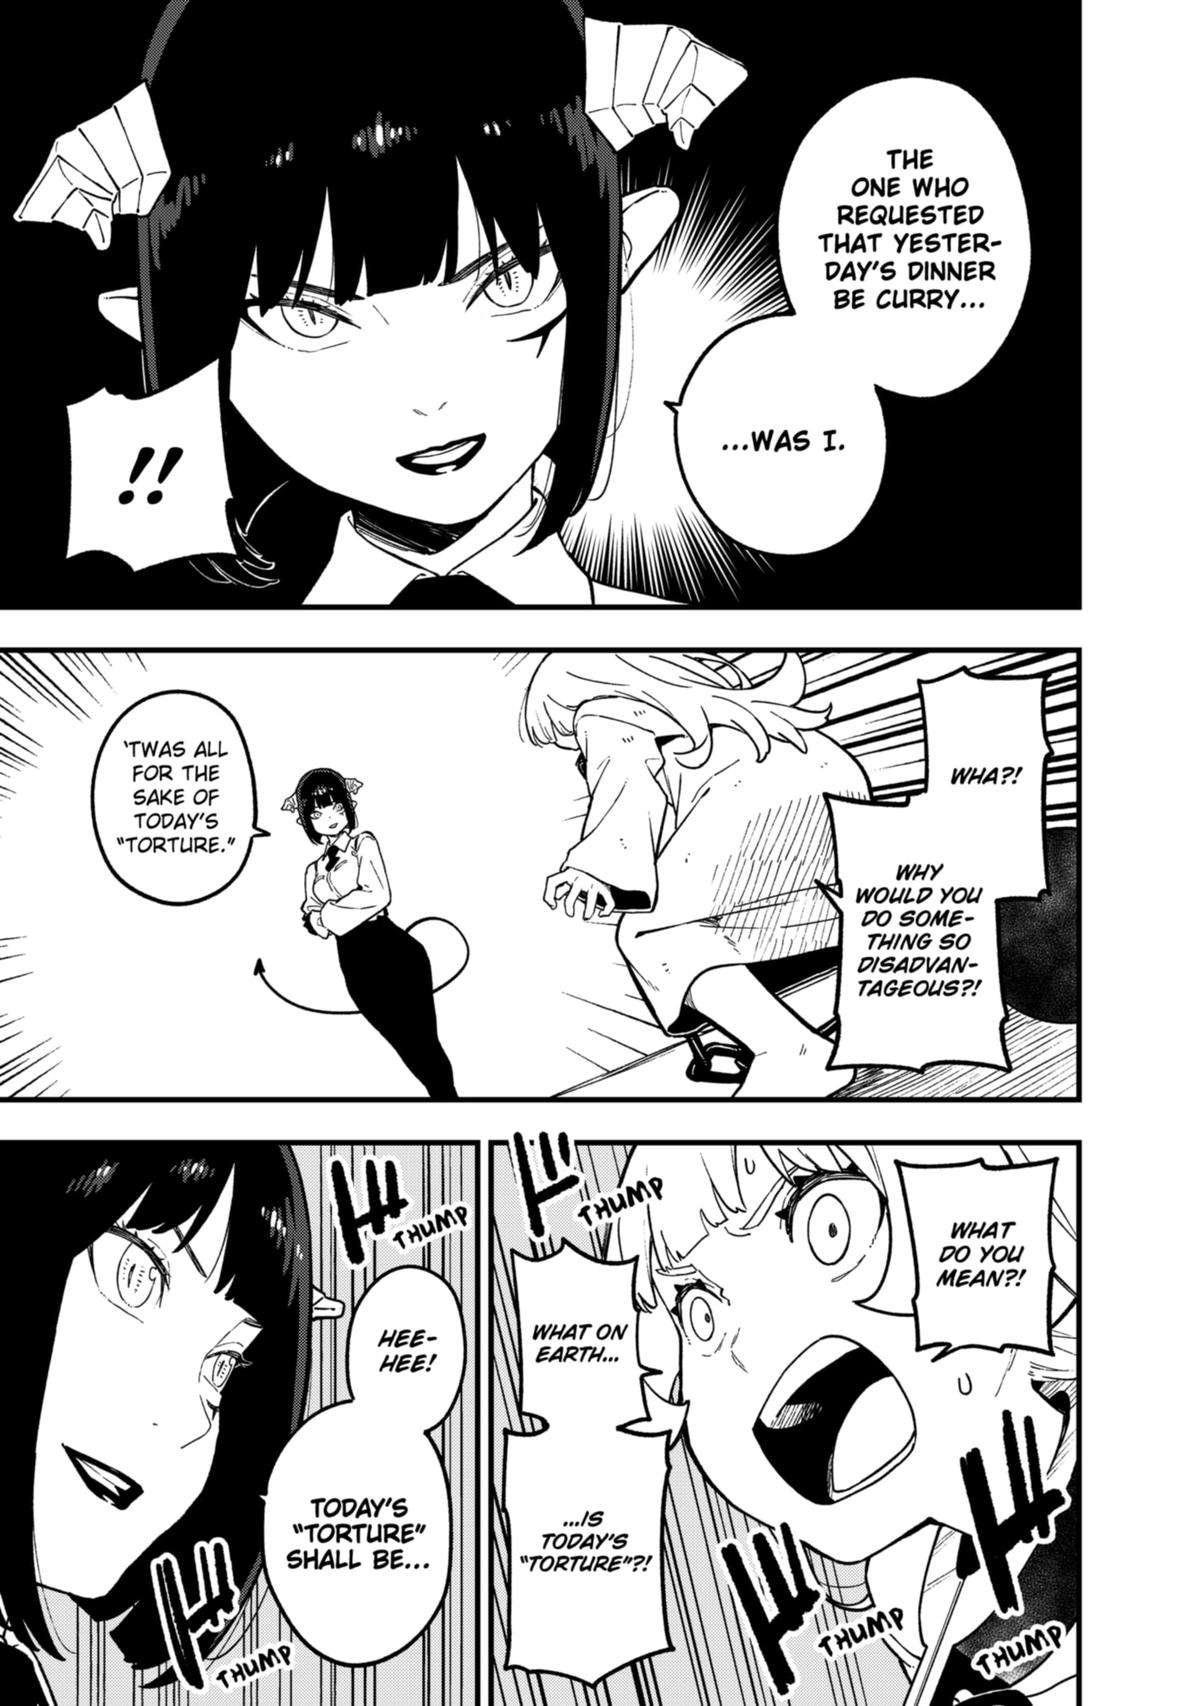 It's Time for "Interrogation", Princess! - chapter 209 - #5